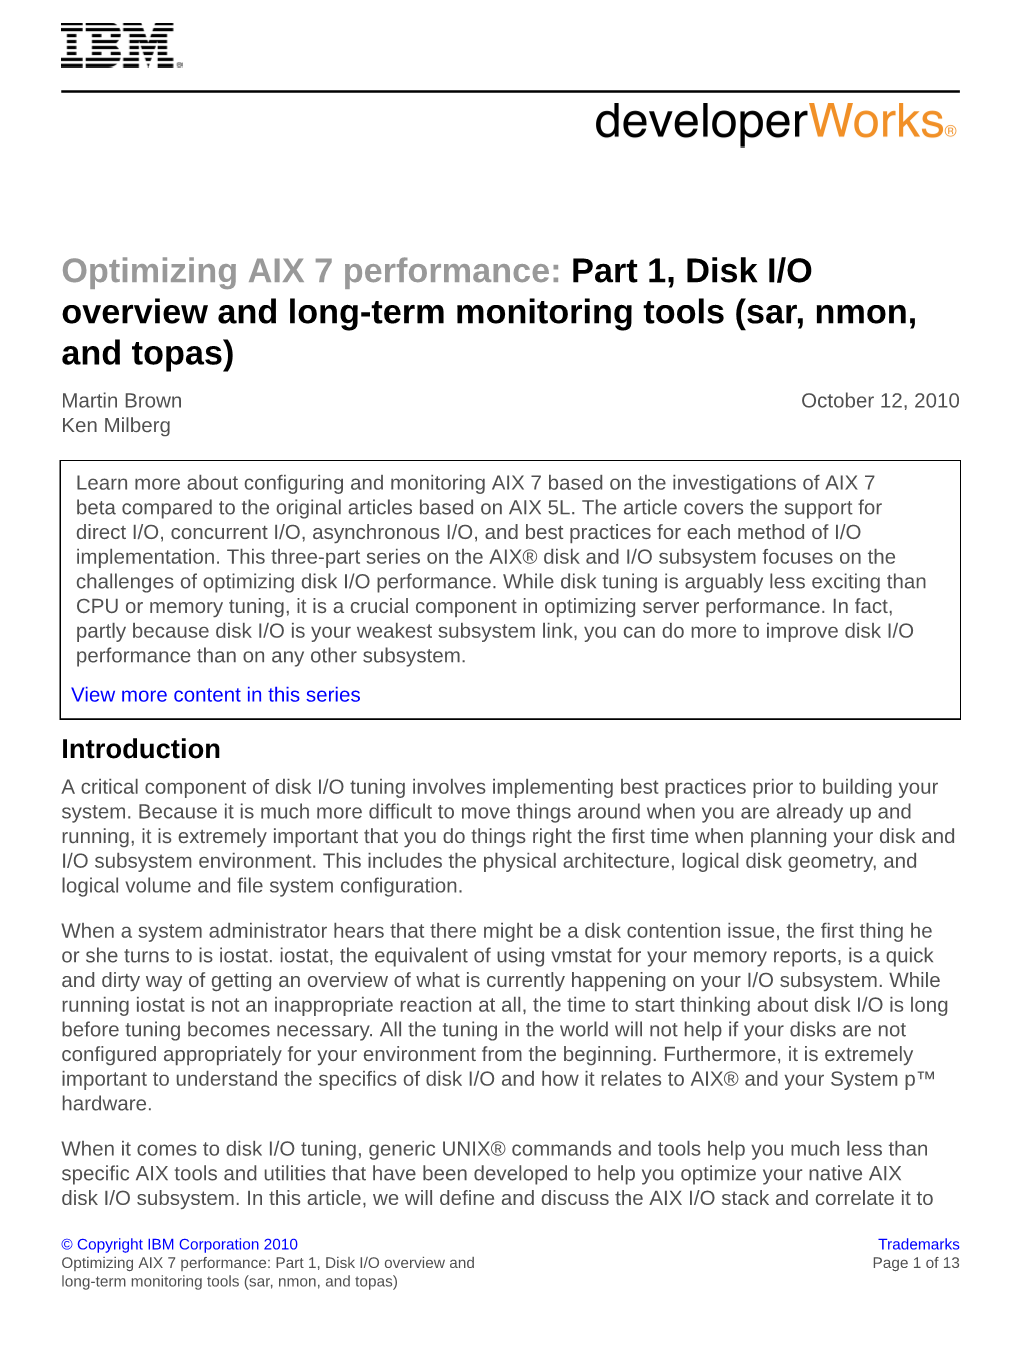 Optimizing AIX 7 Performance: Part 1, Disk I/O Overview and Long-Term Monitoring Tools (Sar, Nmon, and Topas) Martin Brown October 12, 2010 Ken Milberg